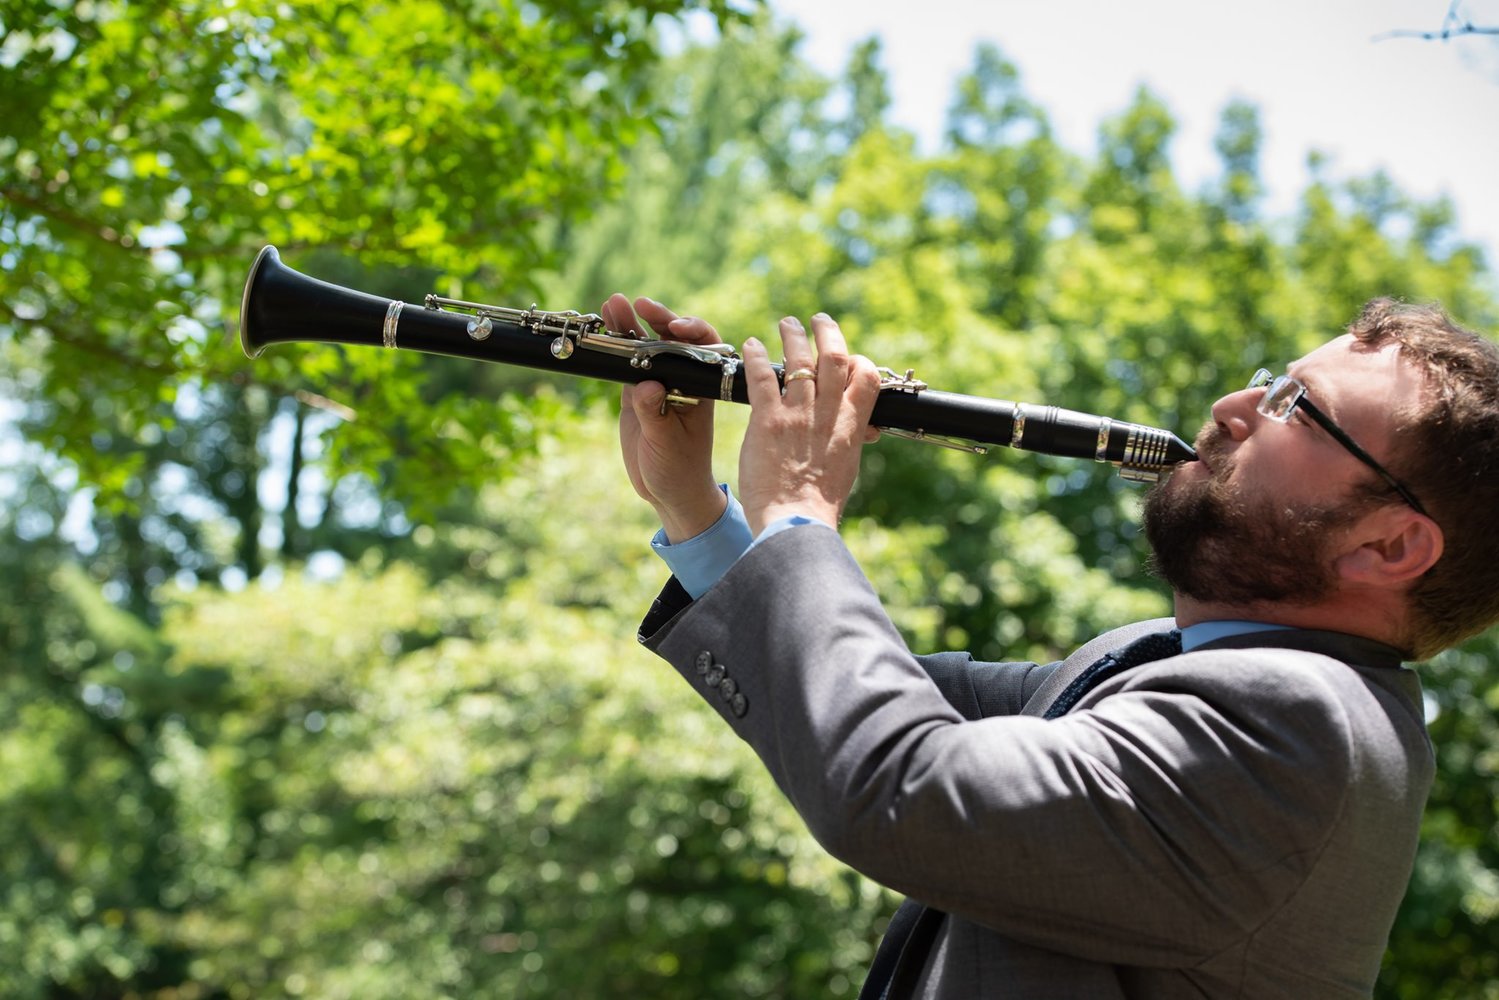 The April concert features the sounds of Seth Kibel performing on clarinet, saxophone and flute.